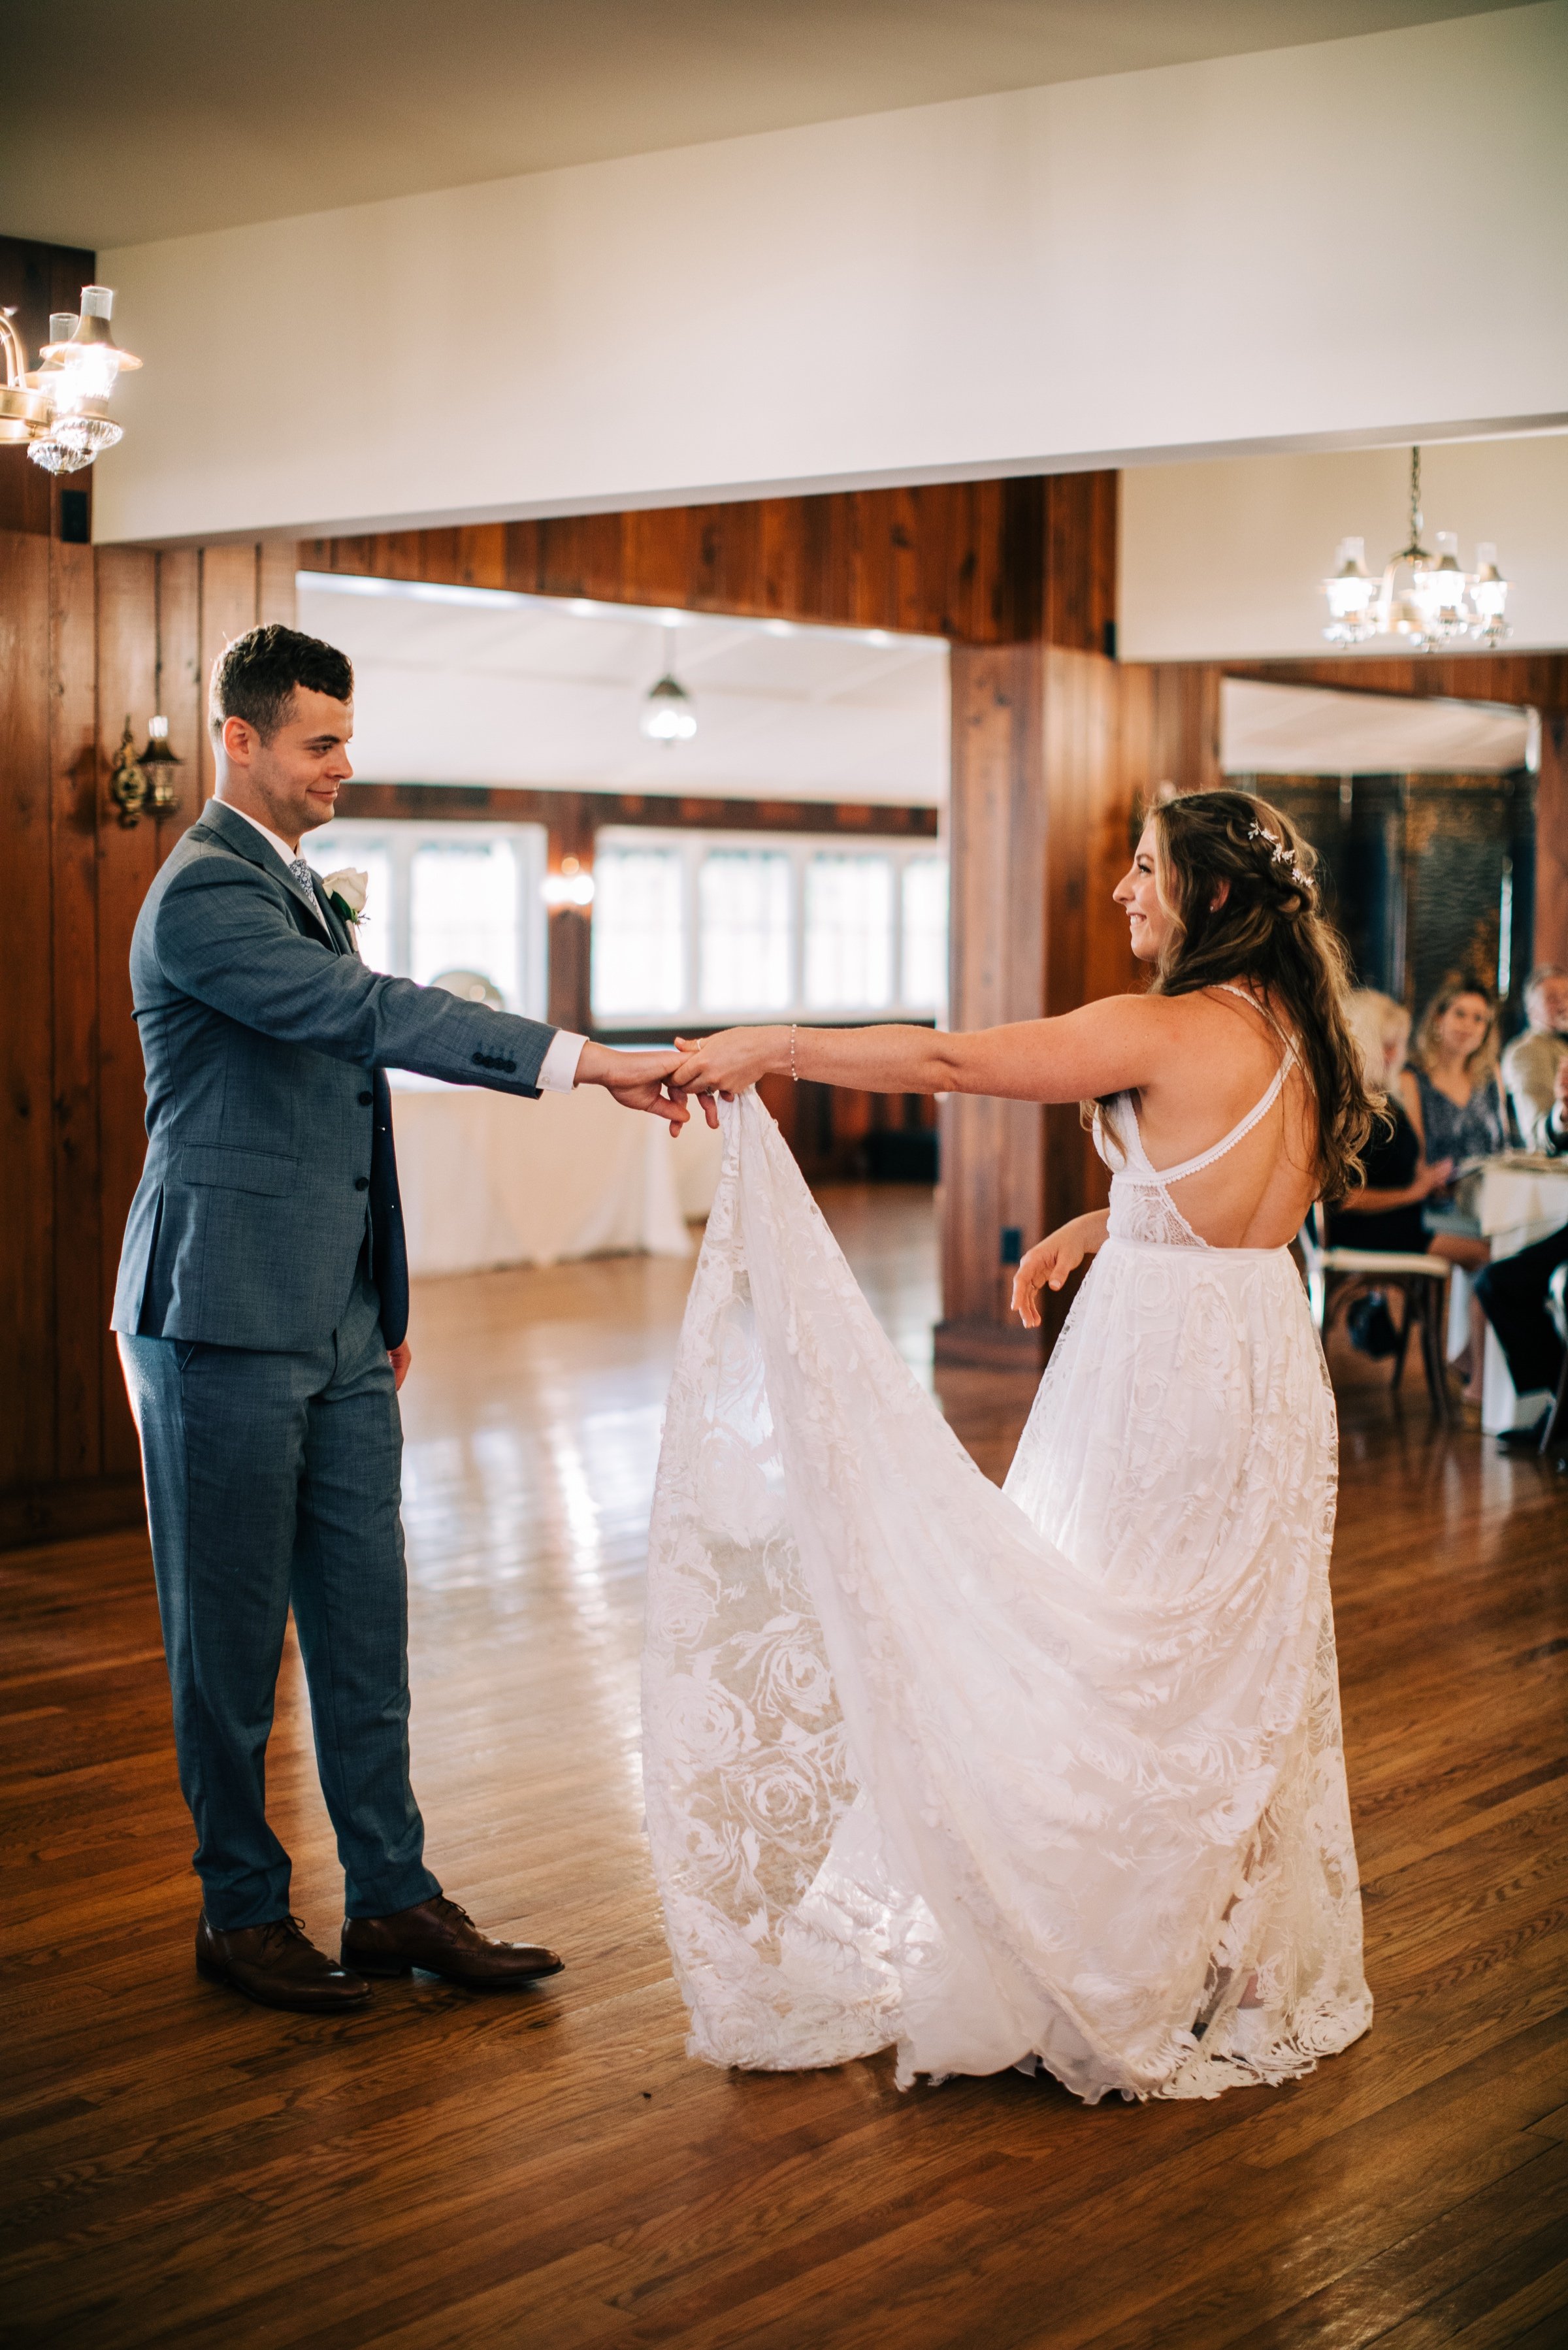 22_bride and groom first dance northshore house wedding new jersey.jpg